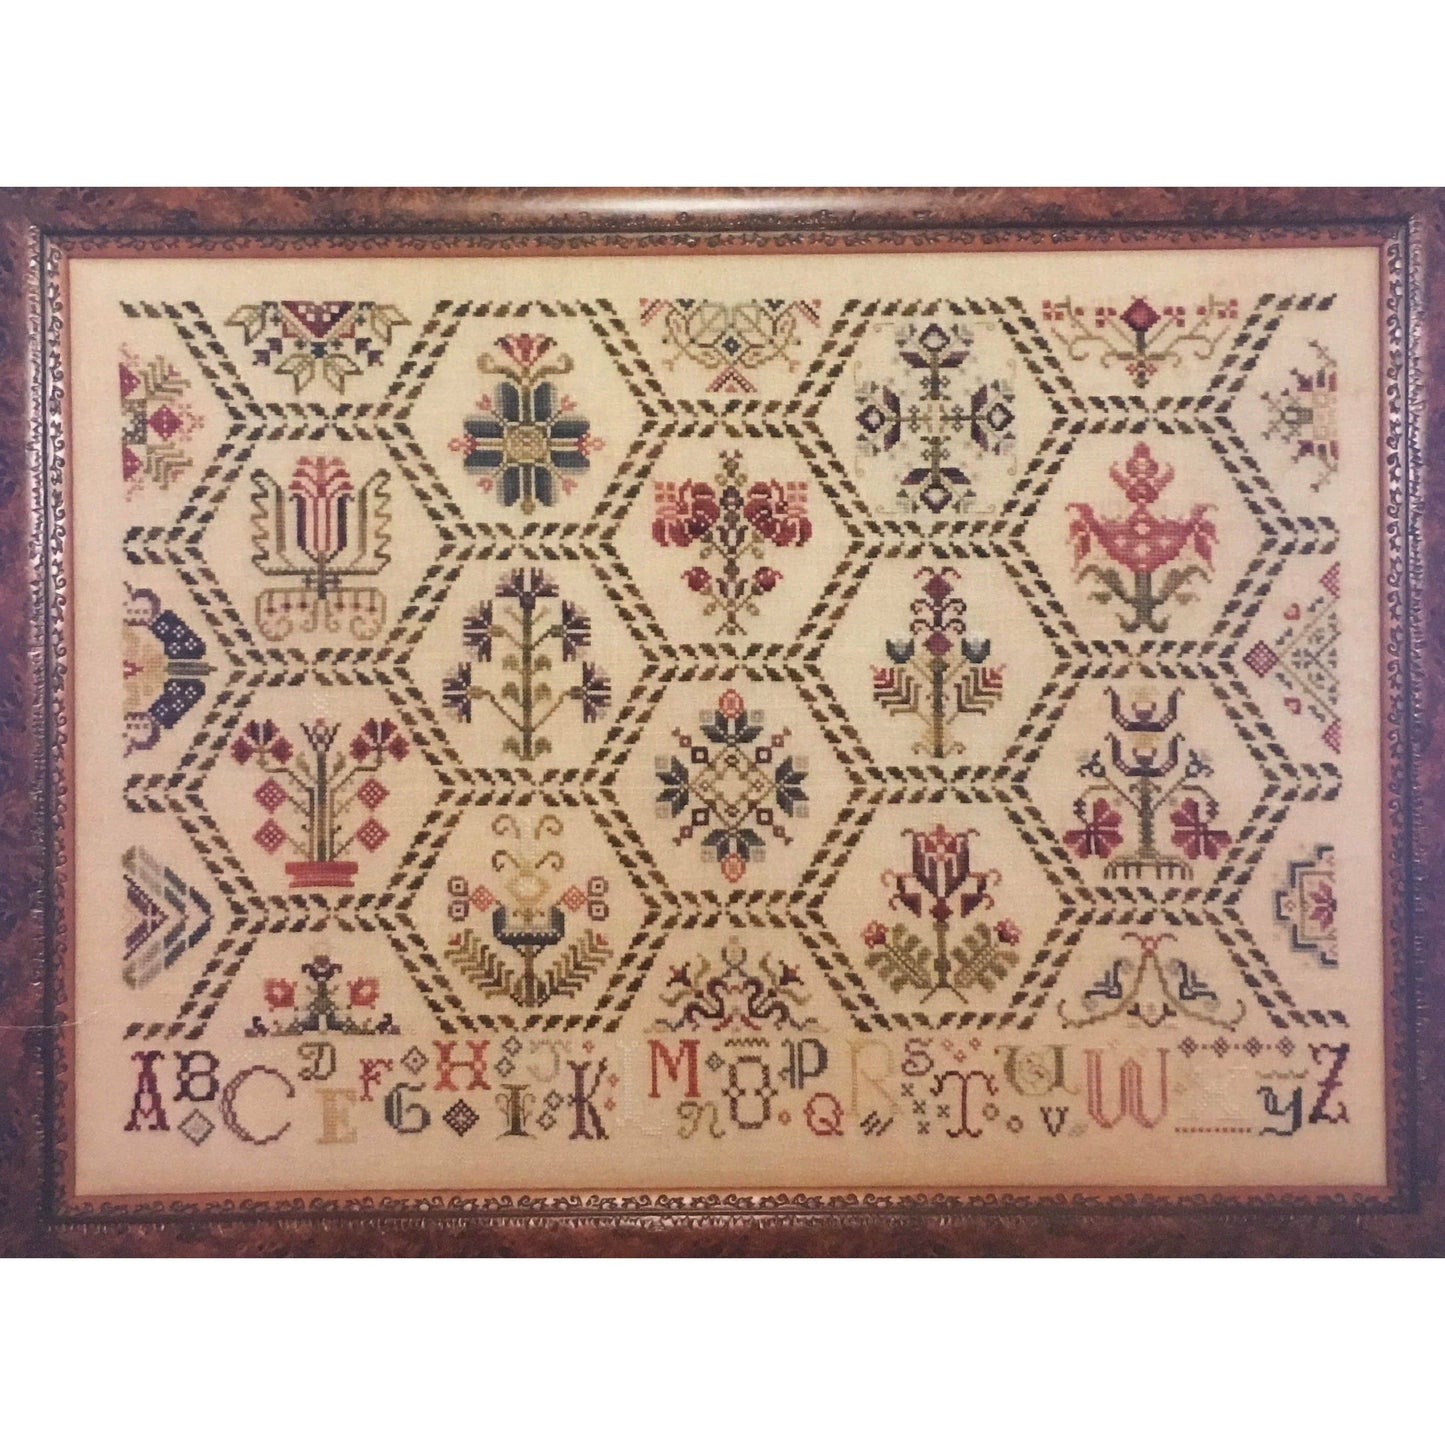 Rosewood Manor ~ Parchement Tapestry Sampler Pattern